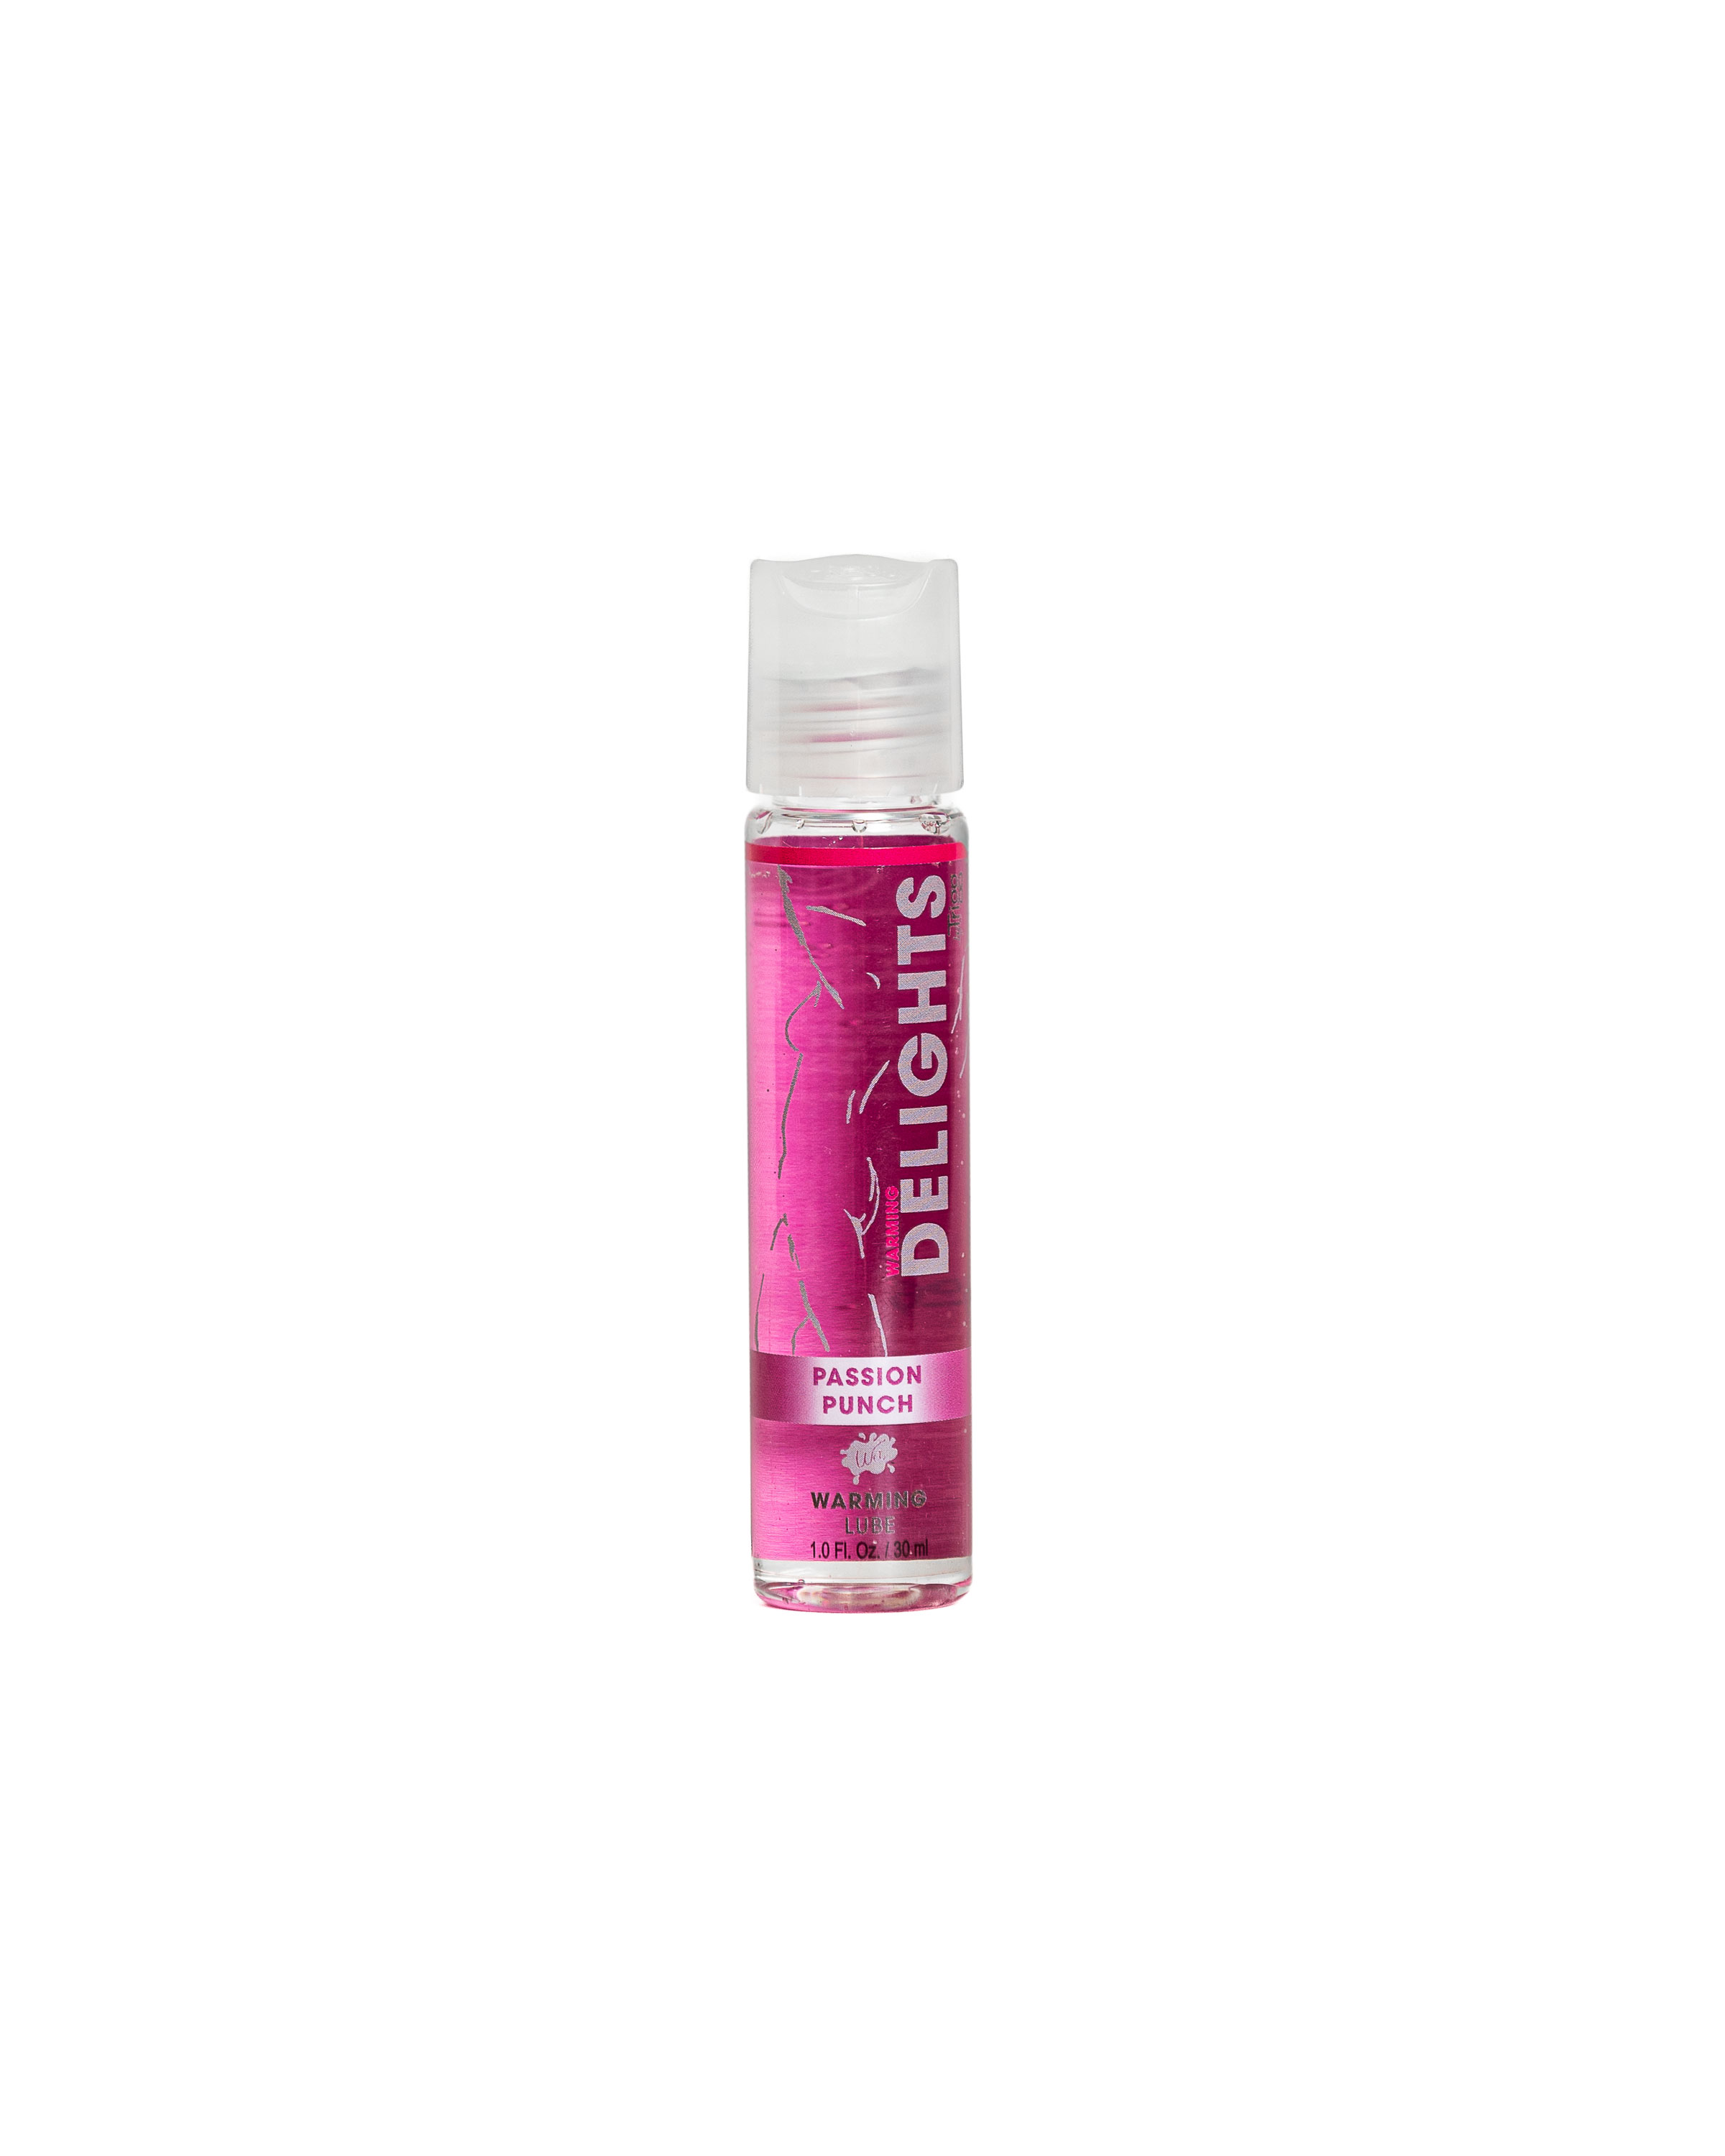 warming delights passion punch flavored lube  oz 